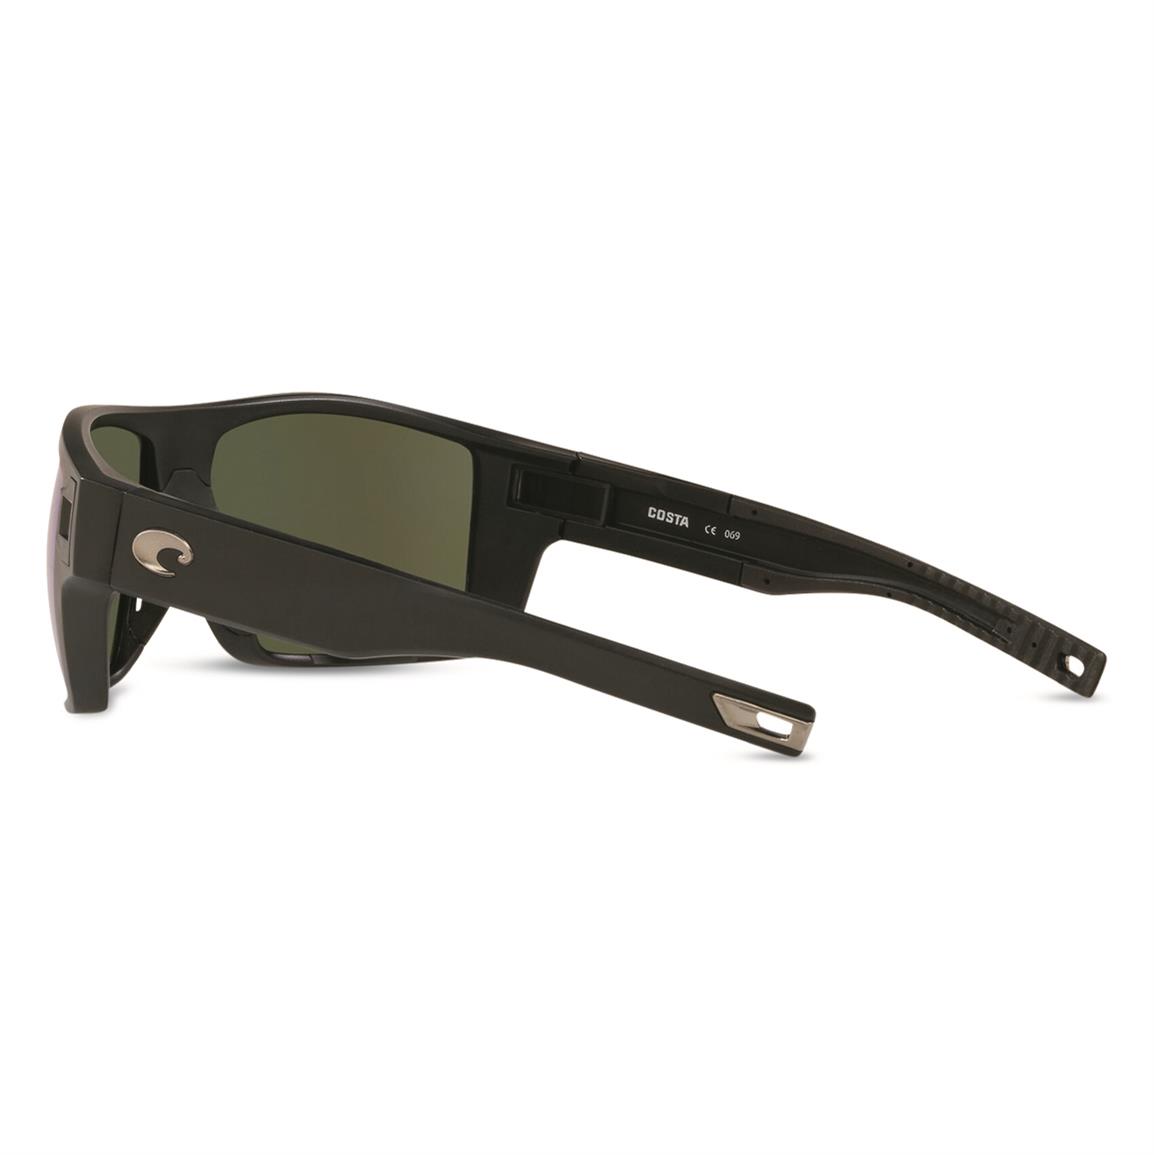 Guide's Choice Polarized Fit Over Sunglasses, 2 Pairs - 202563 ...